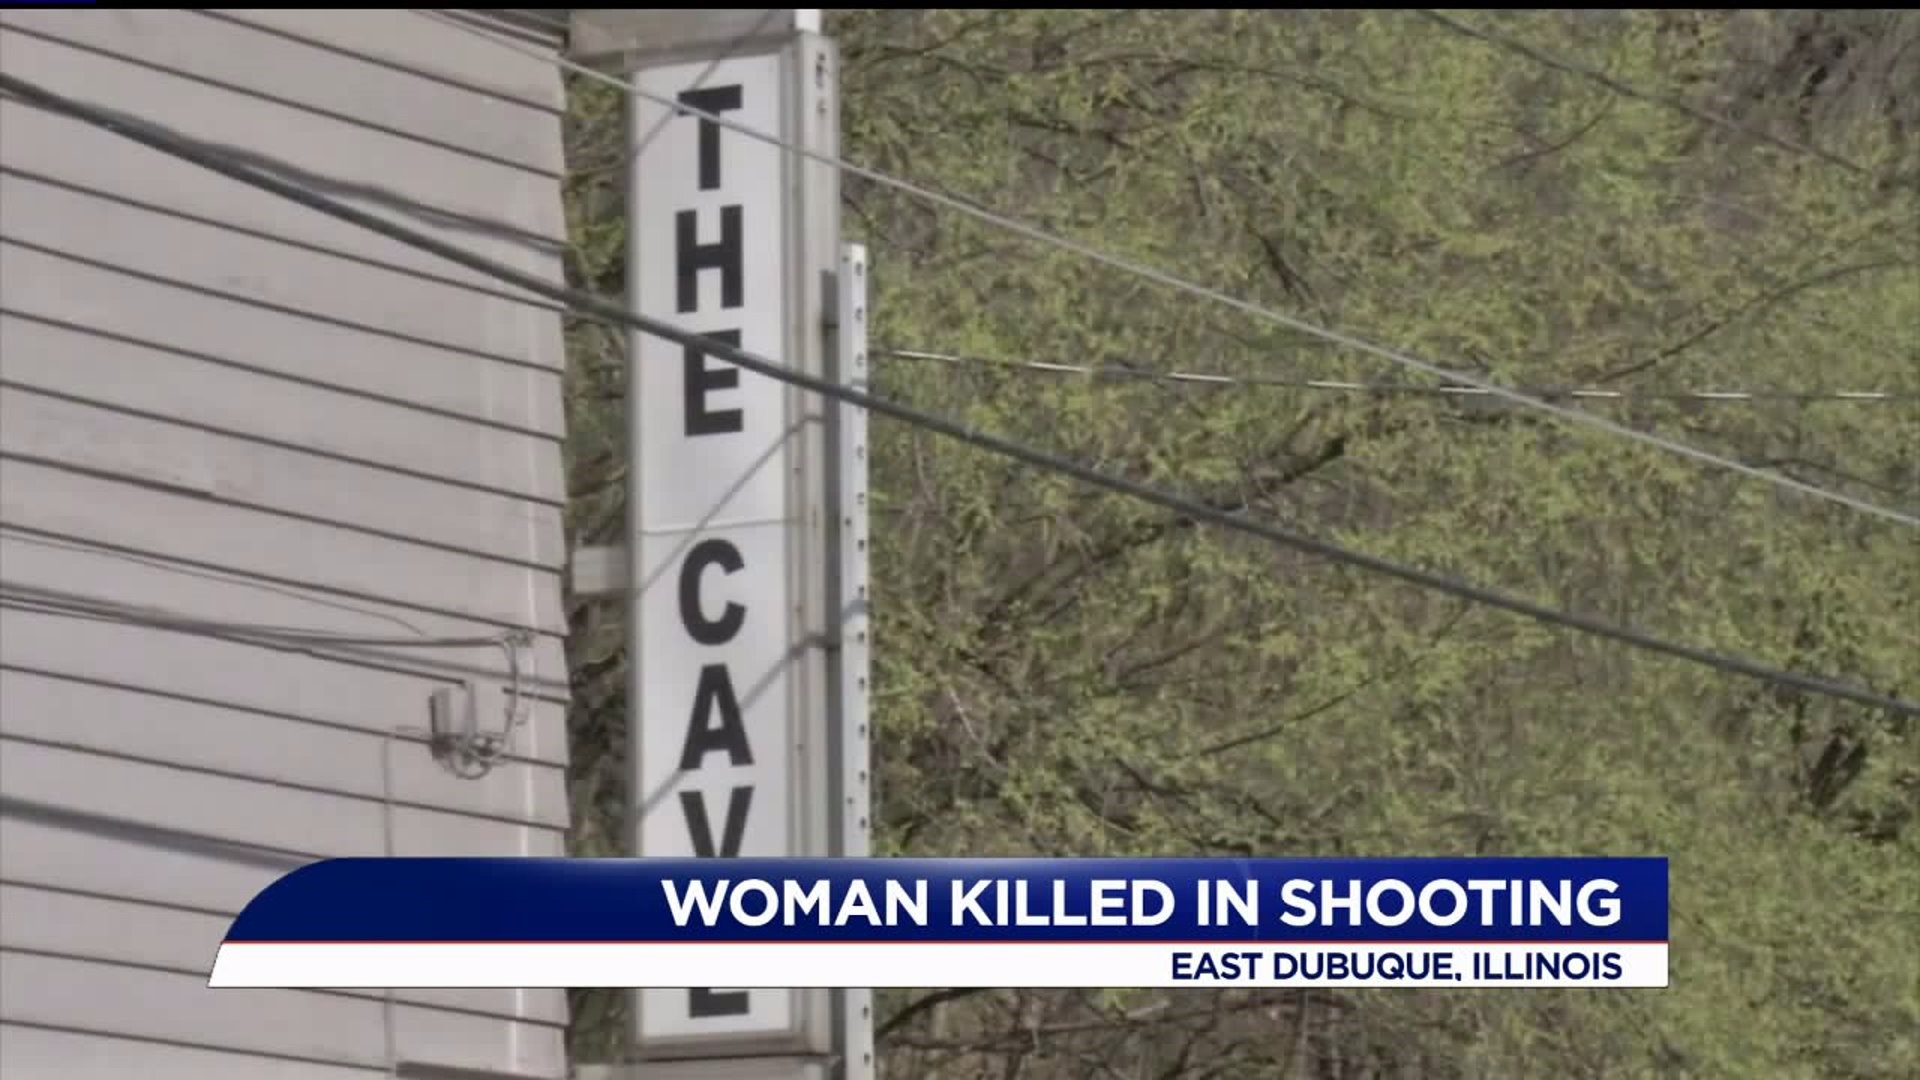 Here`s an update on the woman killed in an East Dubuque shooting